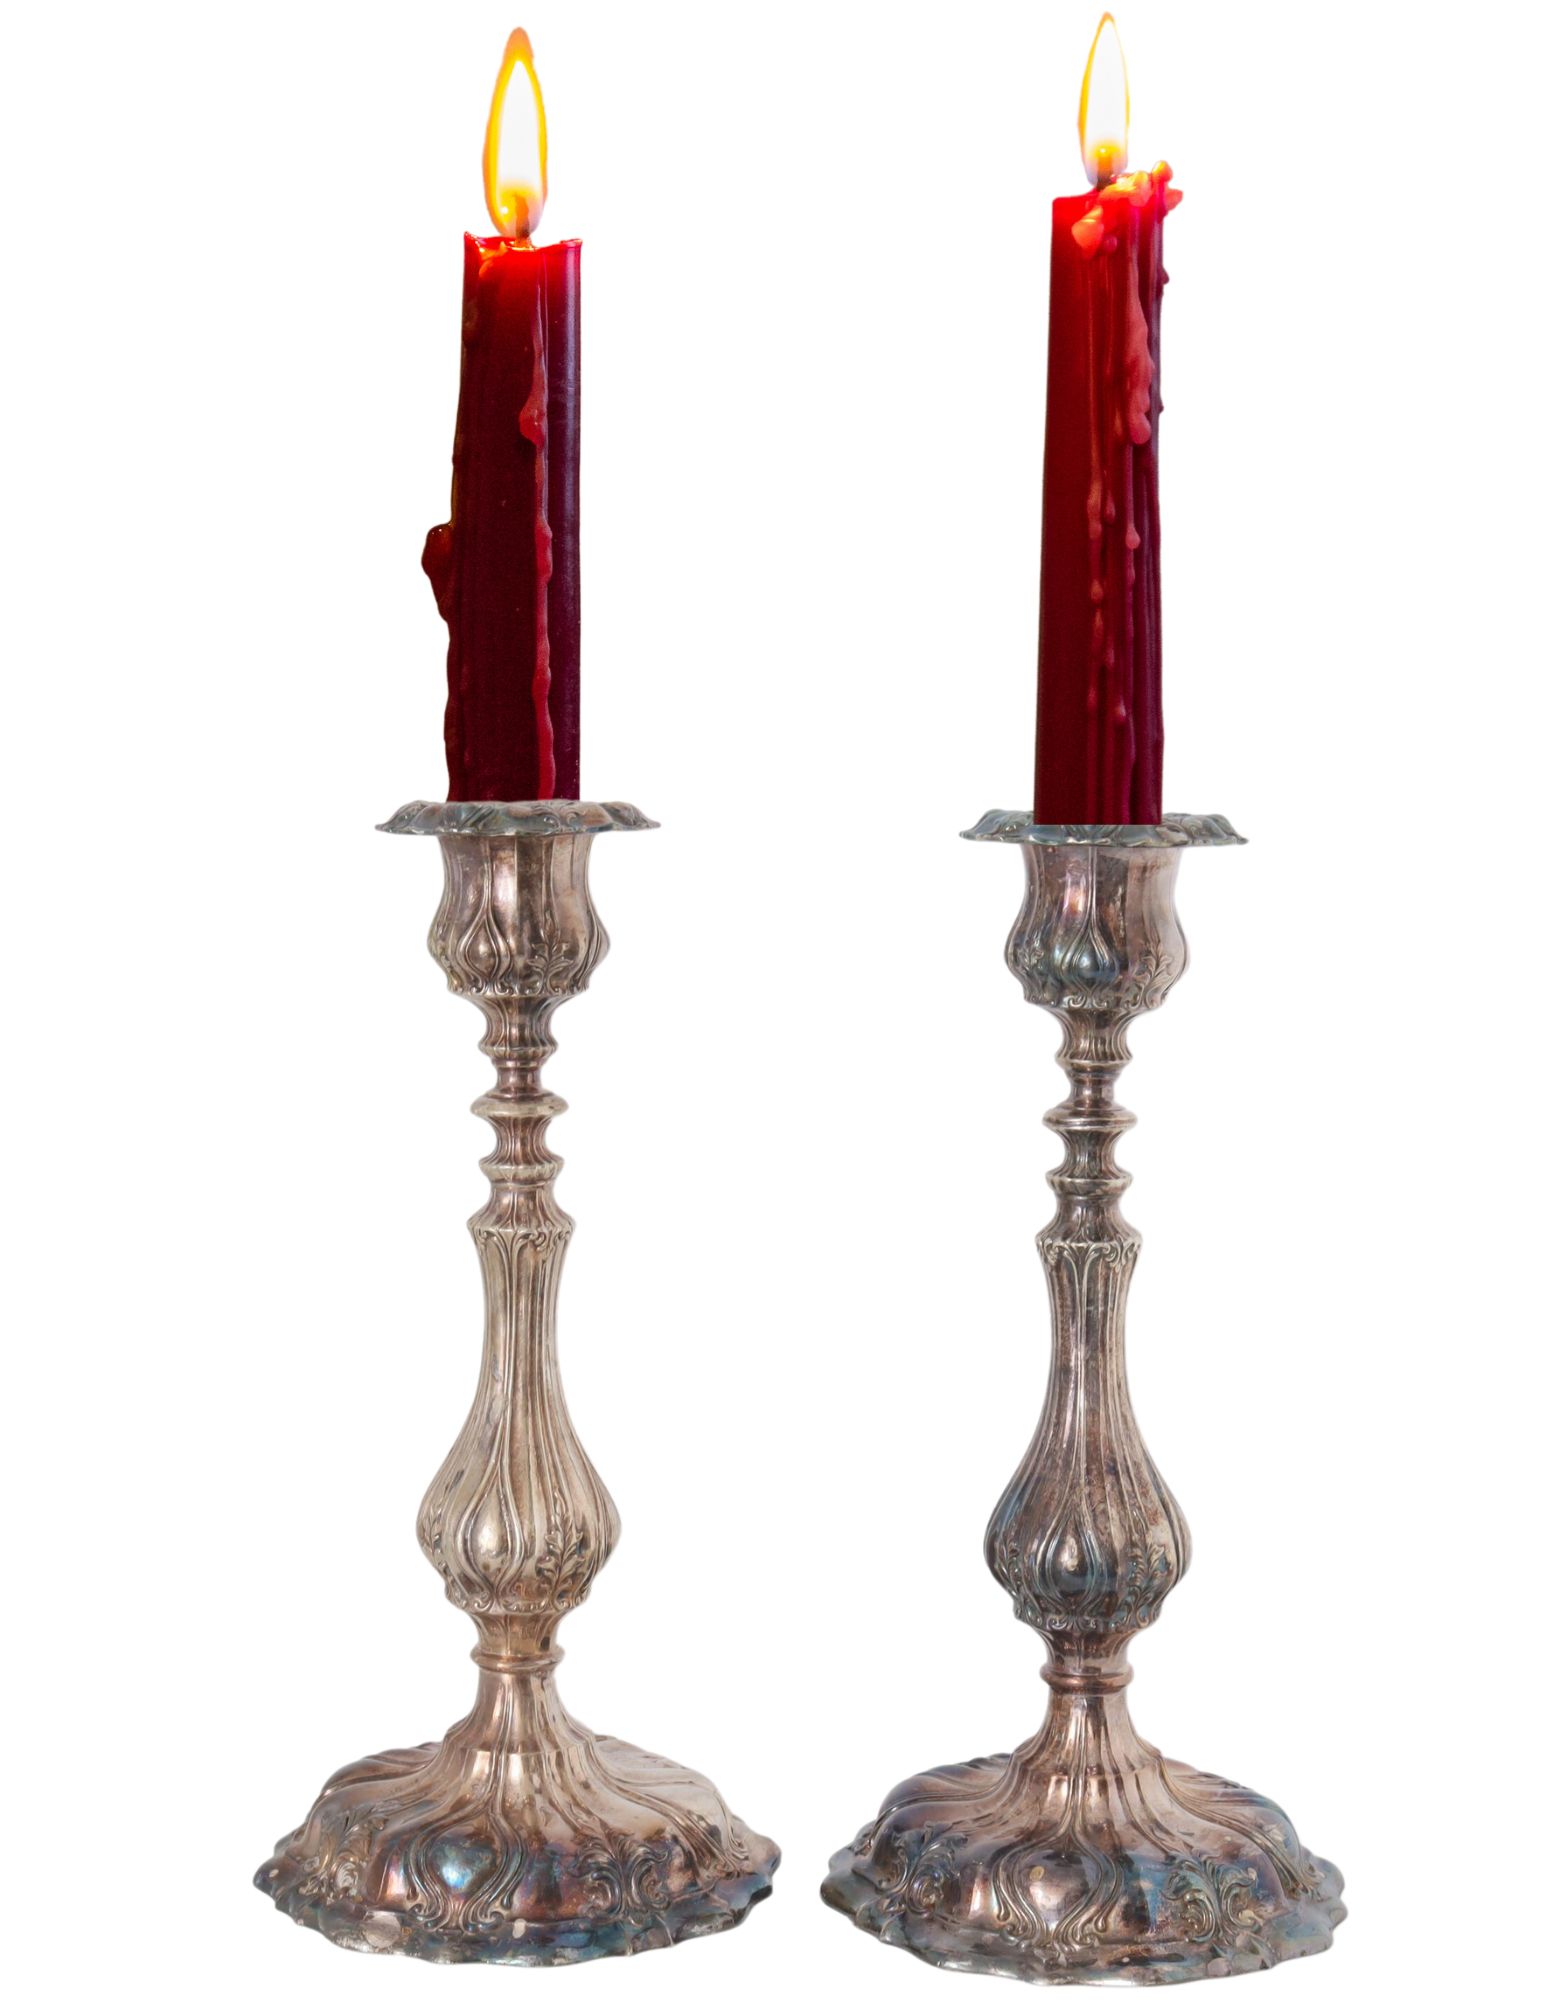 Antique Silver-Plated Candlesticks, Pair~P77681127